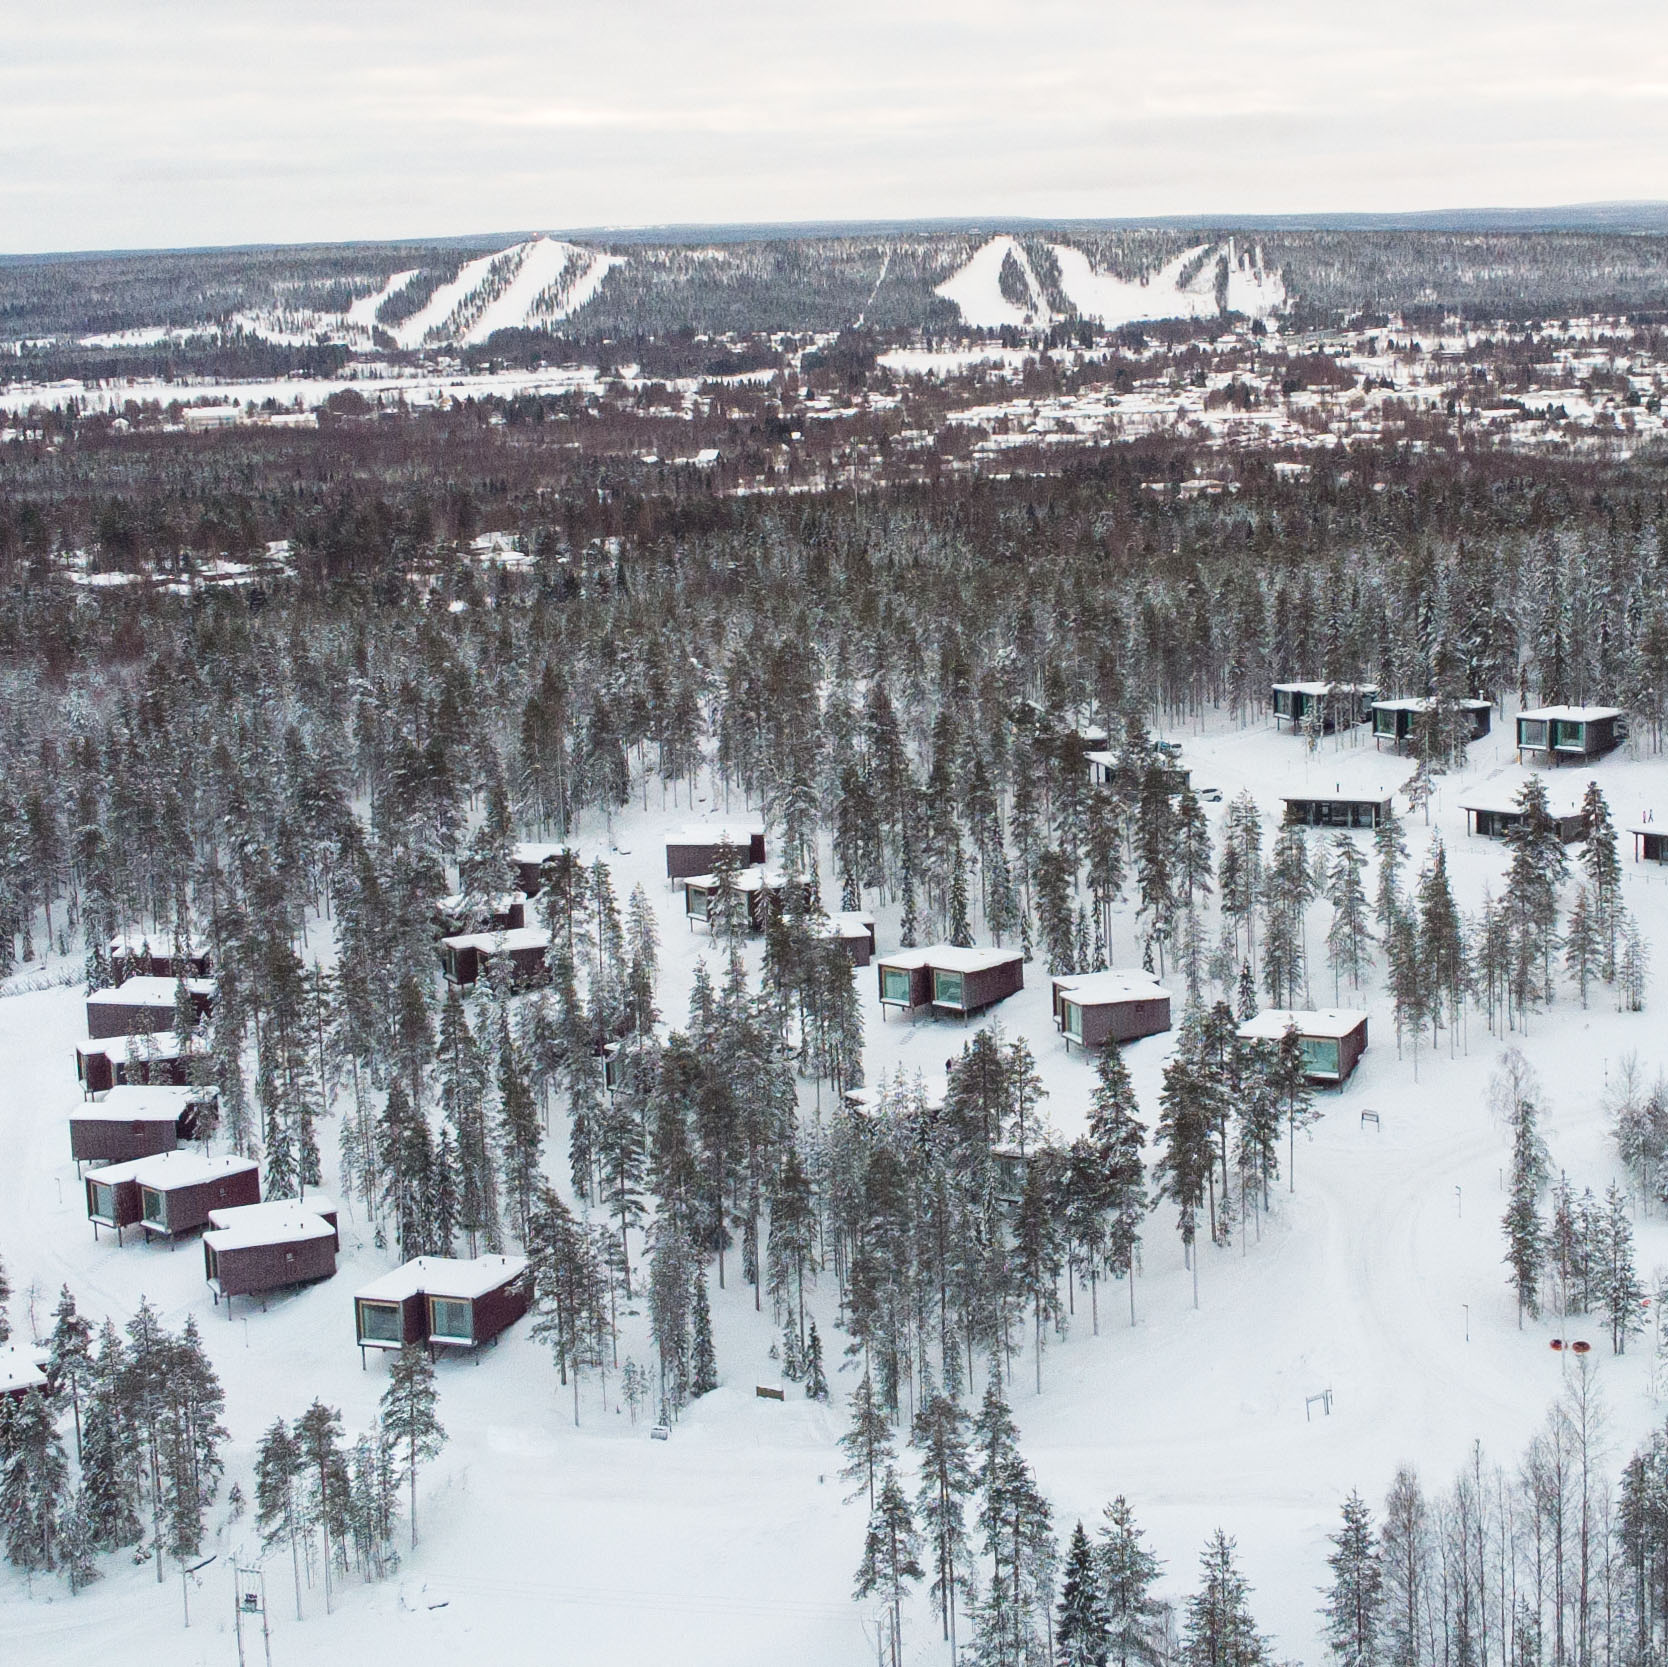 Arctic TreeHouse Hotel is located in beautiful surroundings.